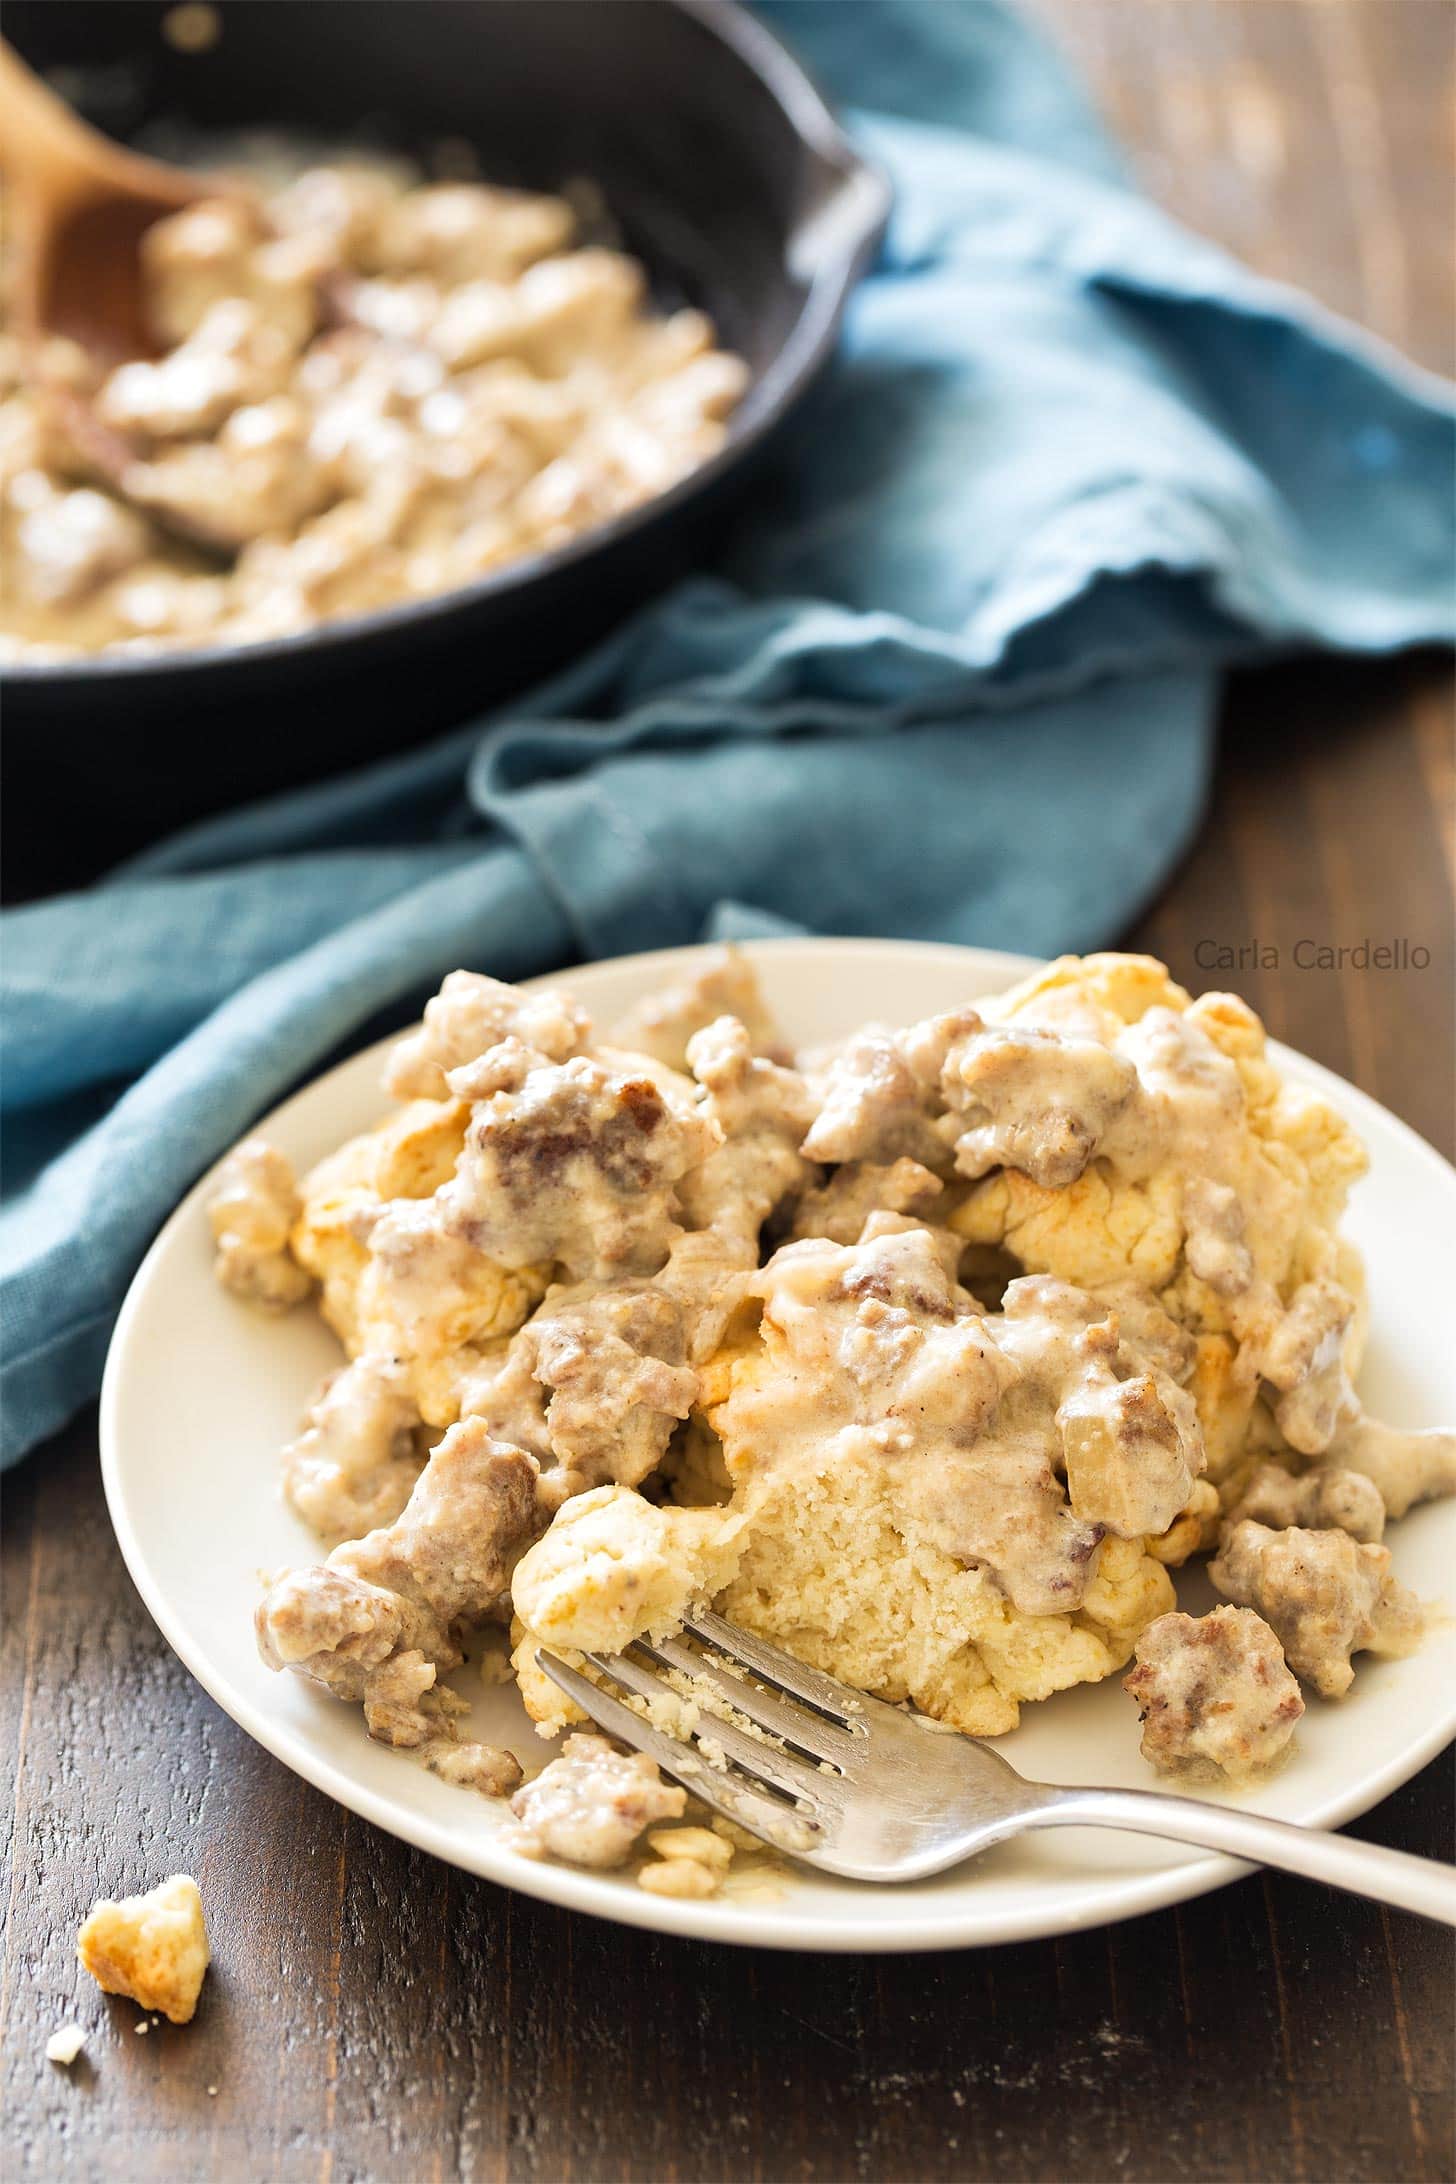 Sausage gravy poured over biscuits